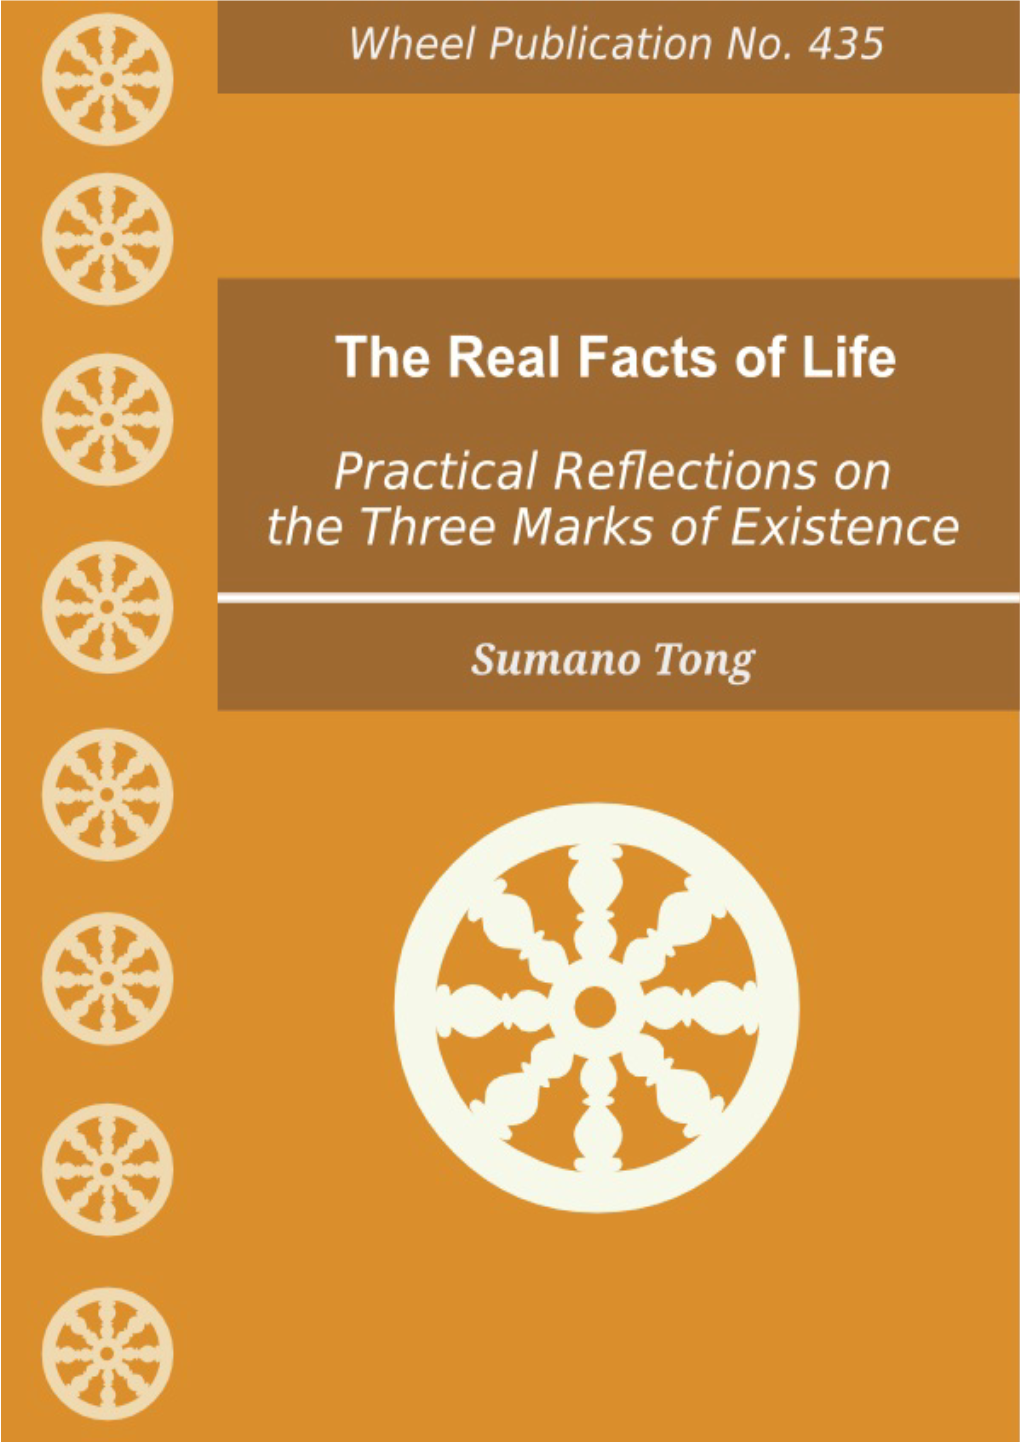 Practical Reflections on the Three Marks of Existence